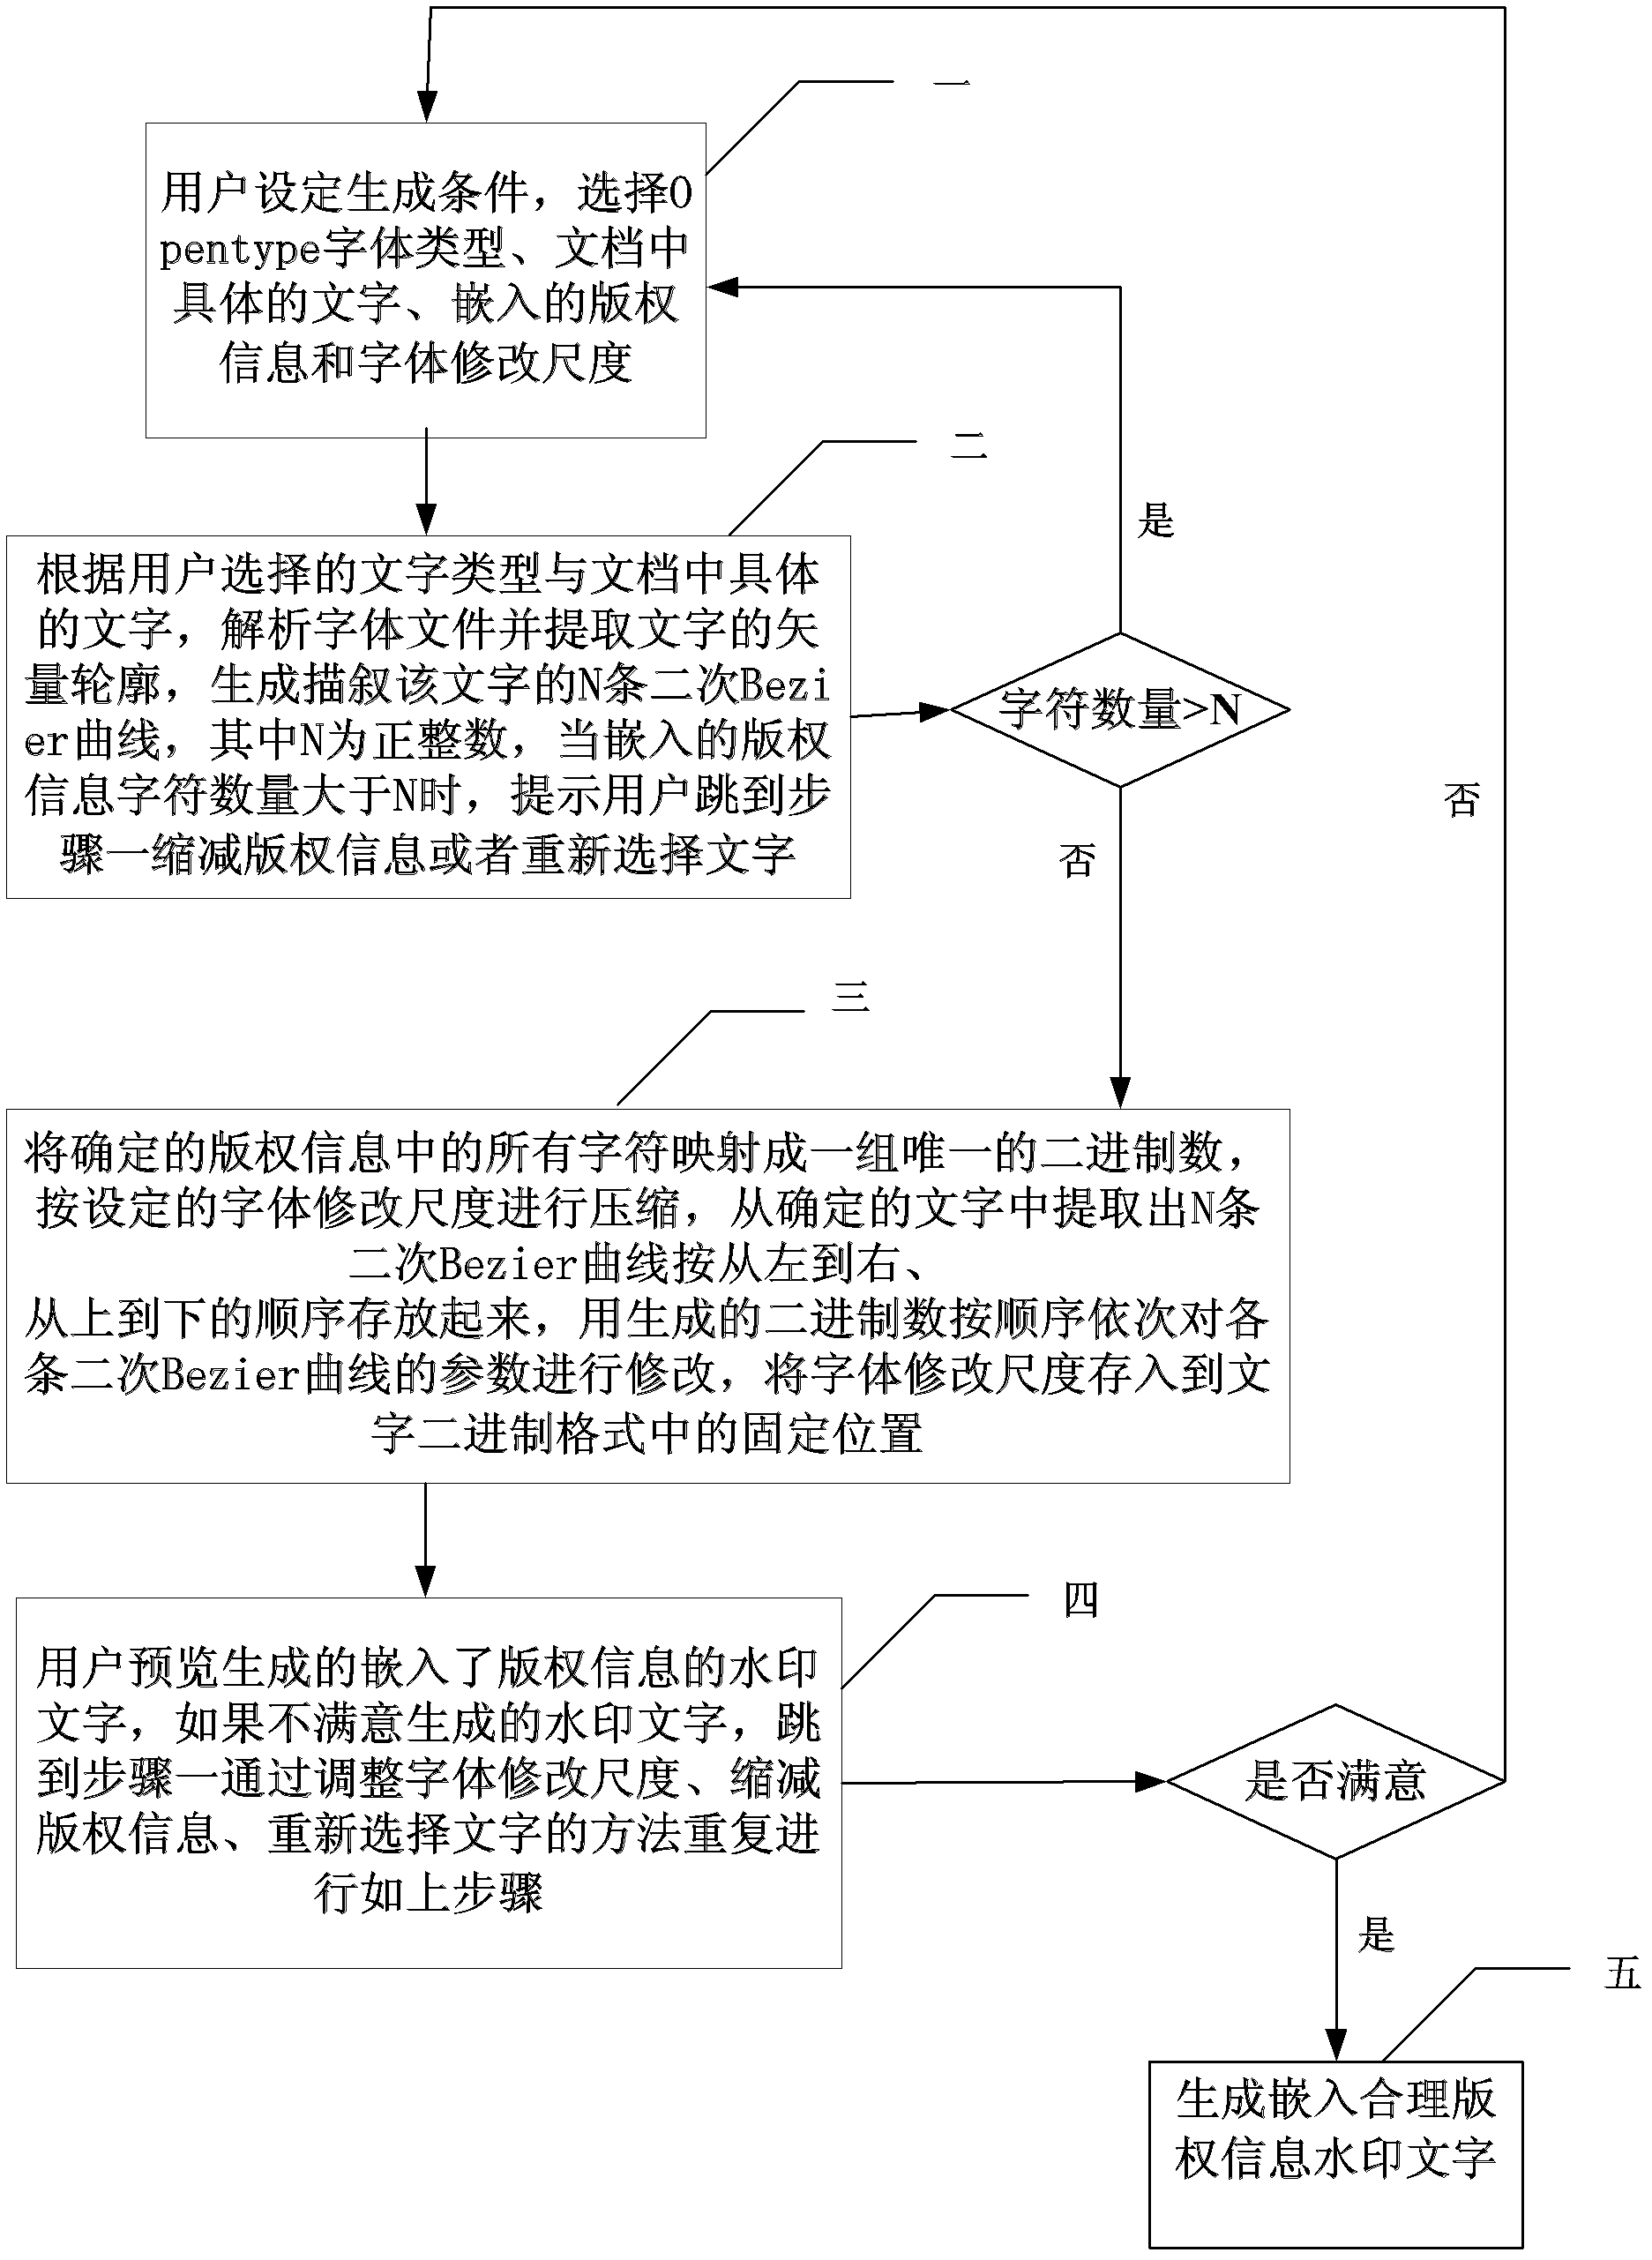 Document watermark copyright information protection device based on Opentype vector outline fonts